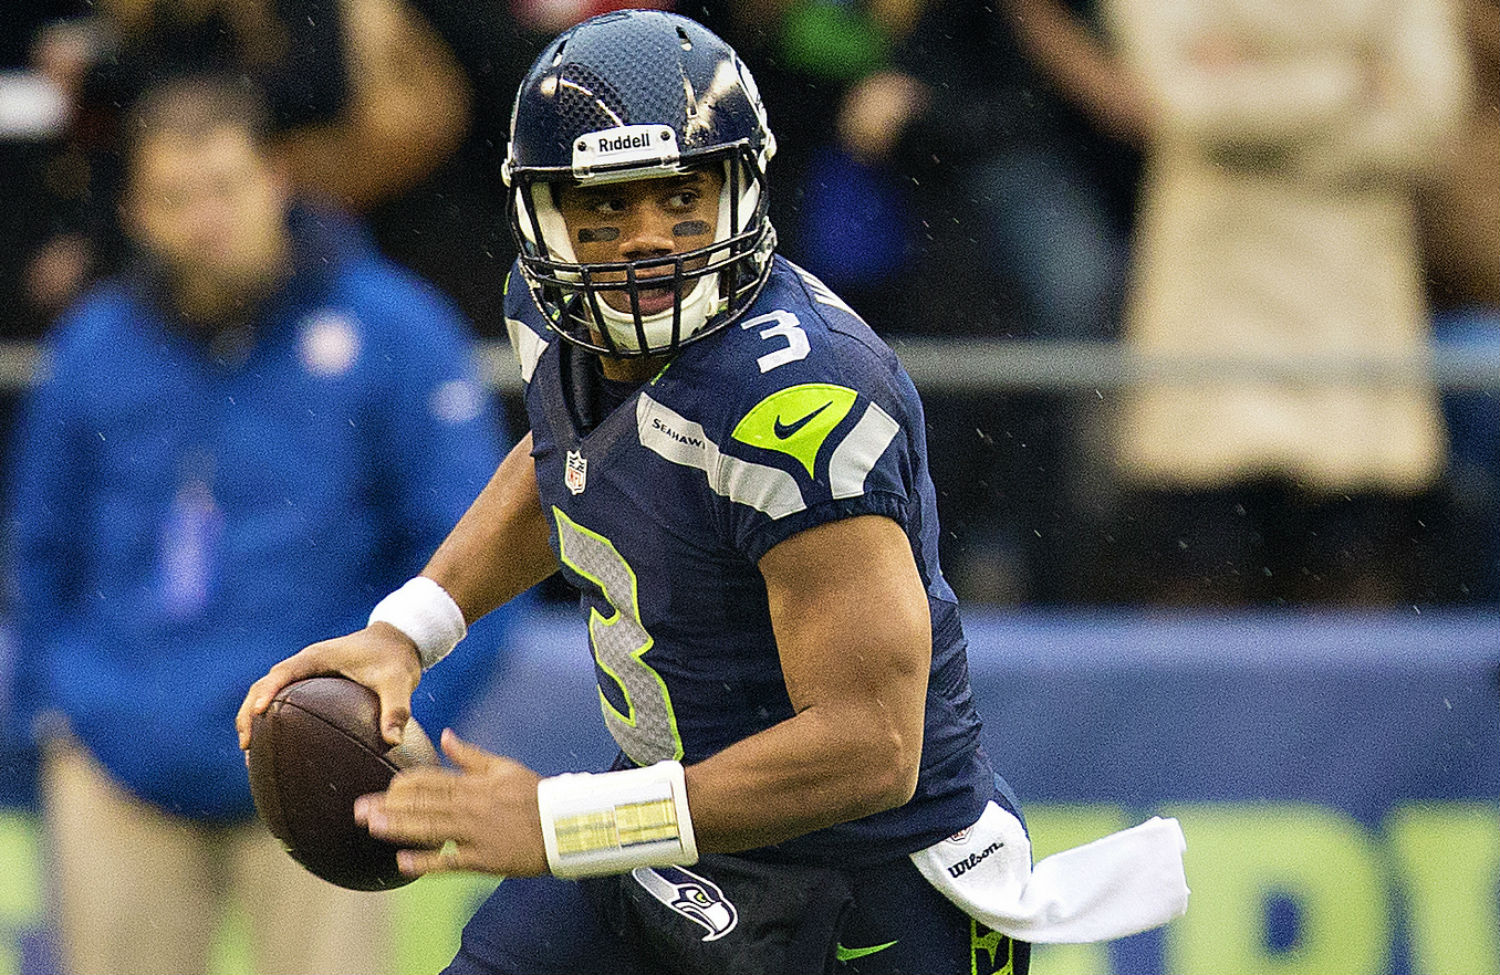 Not a Broncos Fan? Then This Super Bowl, Root for Russell Wilson